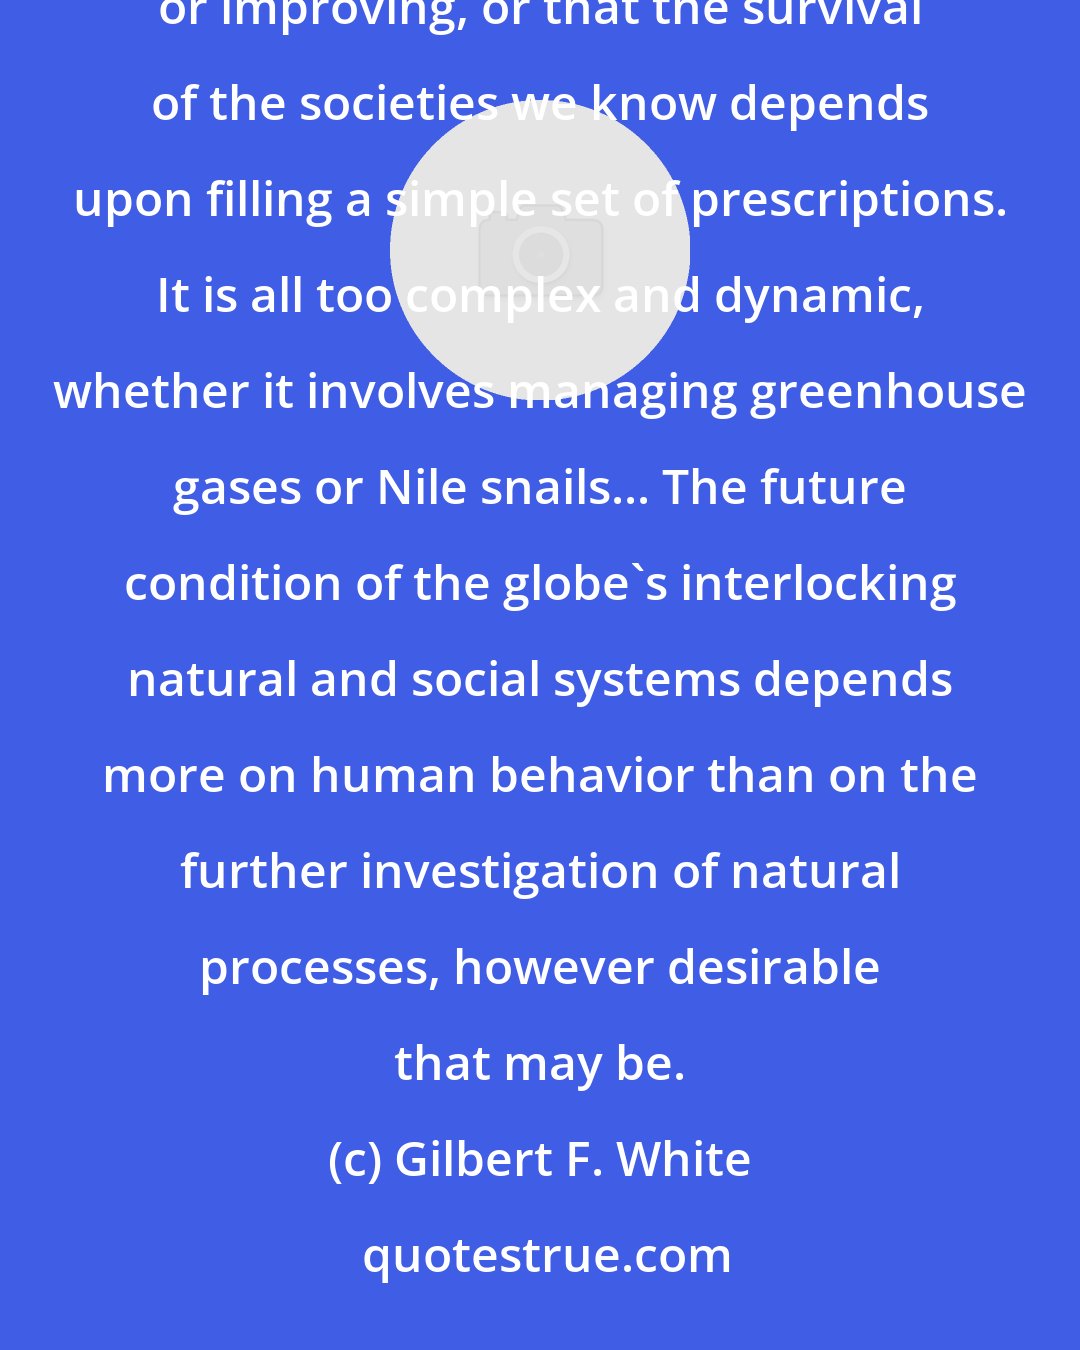 Gilbert F. White: It would be rash to conclude that, on balance, the environment of the globe as a whole is either deteriorating or improving, or that the survival of the societies we know depends upon filling a simple set of prescriptions. It is all too complex and dynamic, whether it involves managing greenhouse gases or Nile snails... The future condition of the globe's interlocking natural and social systems depends more on human behavior than on the further investigation of natural processes, however desirable that may be.